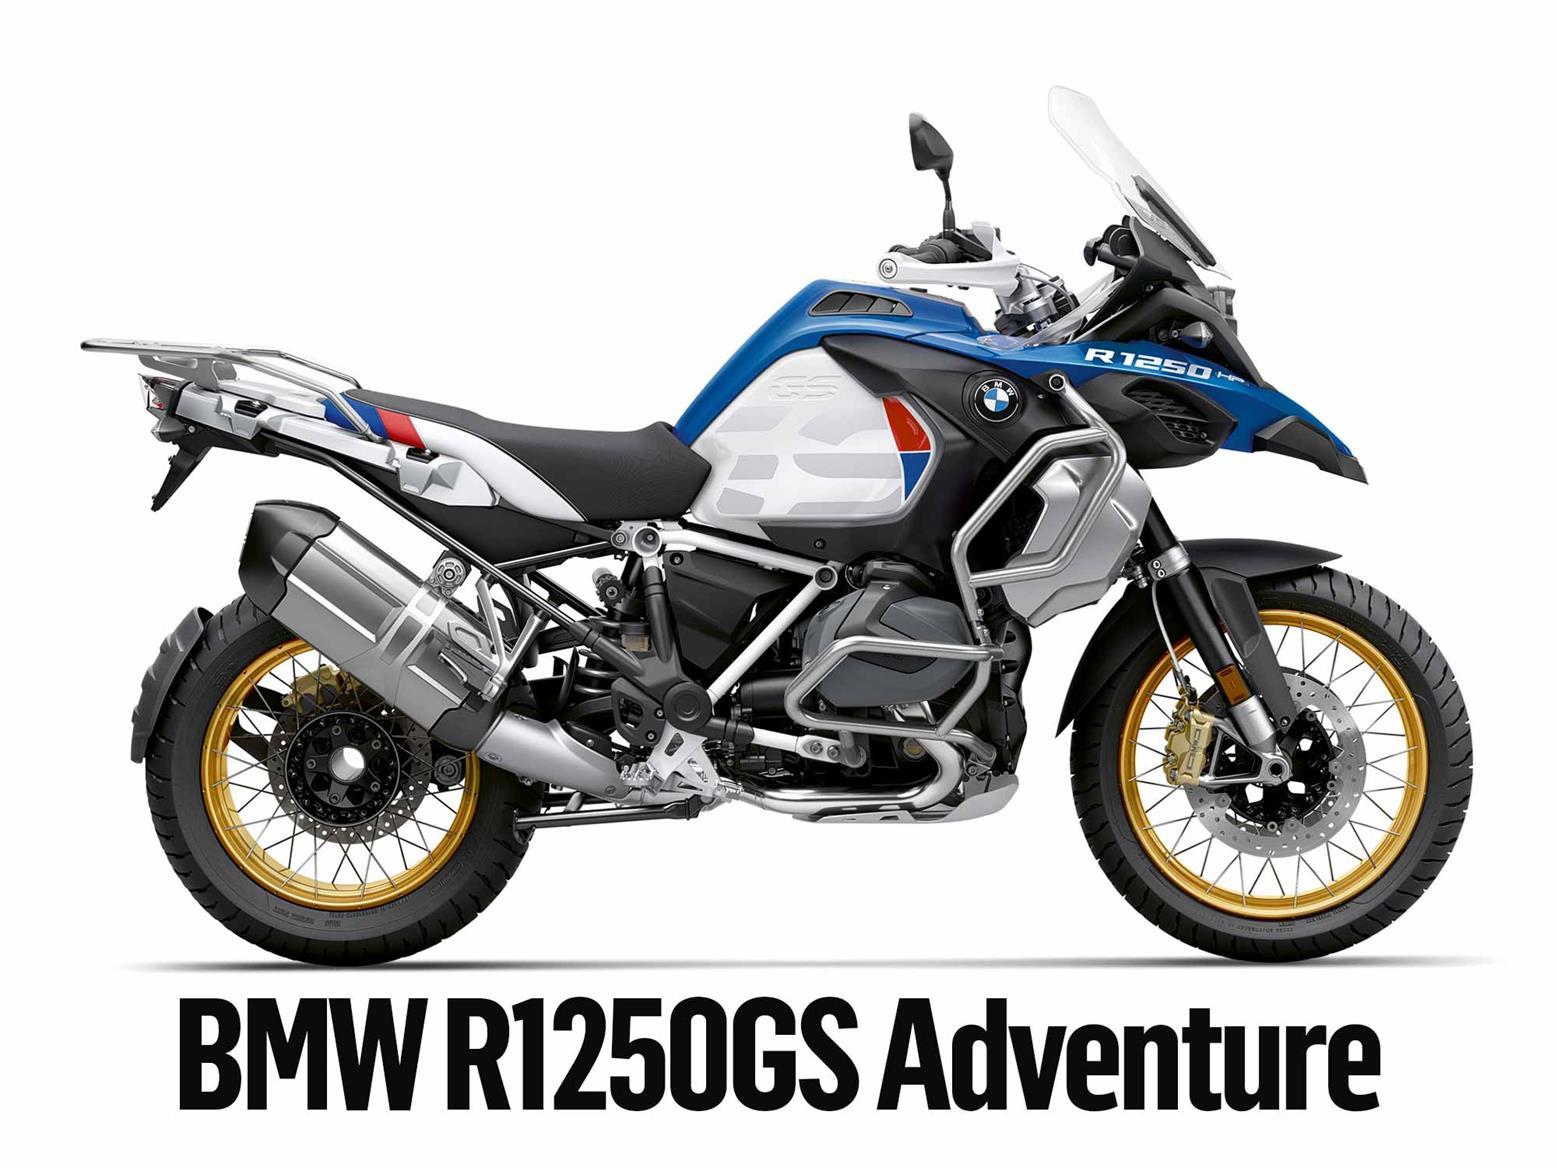 Read MCN's detailed BMW R1250GS Adventure long-term test here